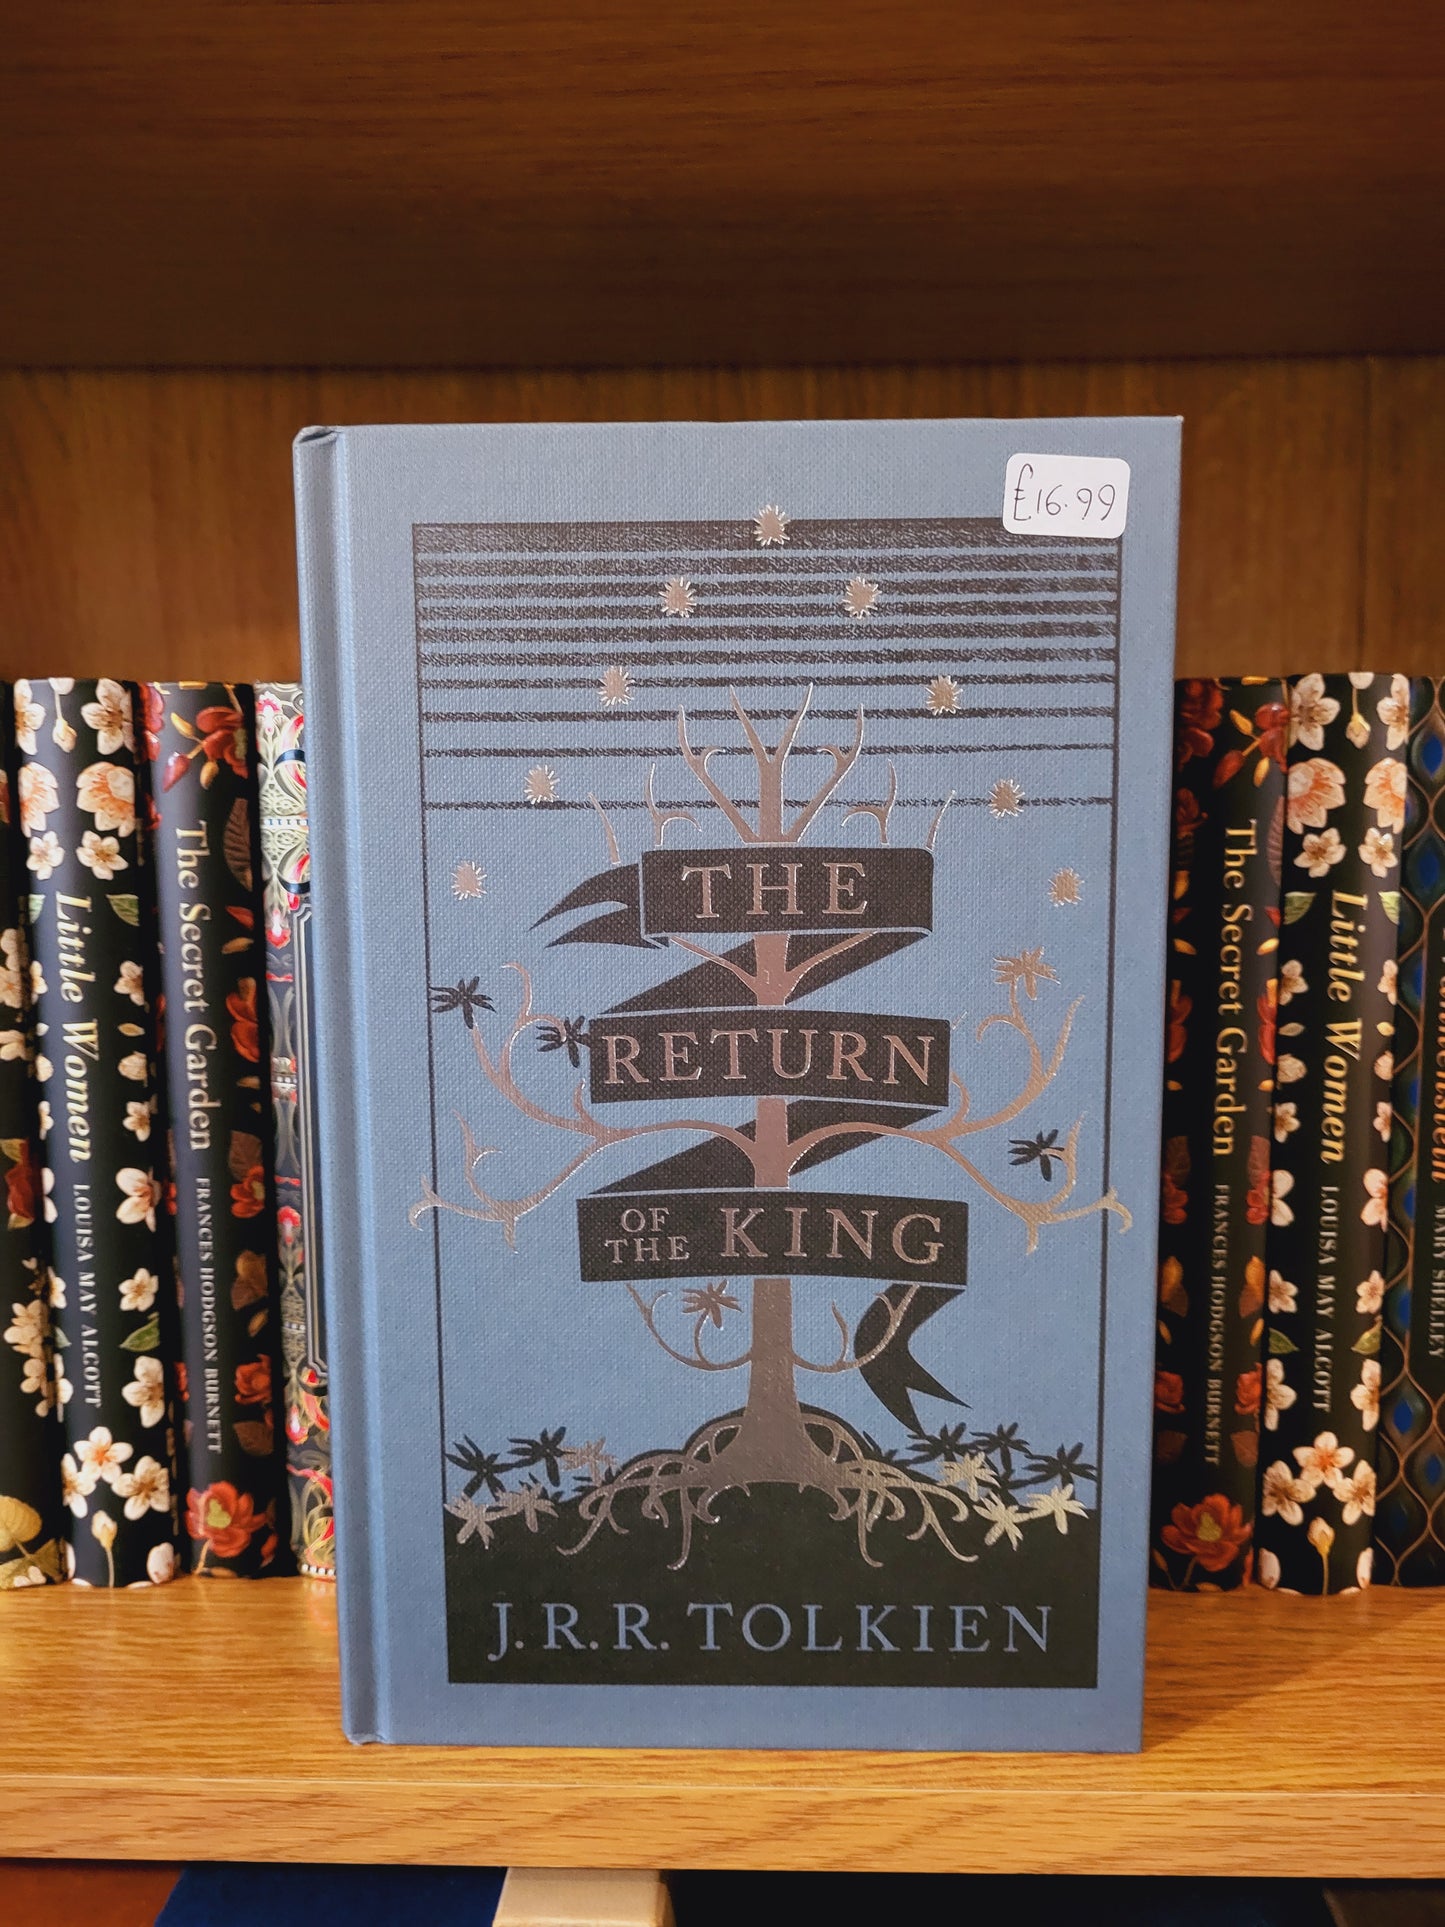 The Return of the King - J.R.R. Tolkien (Clothbound)